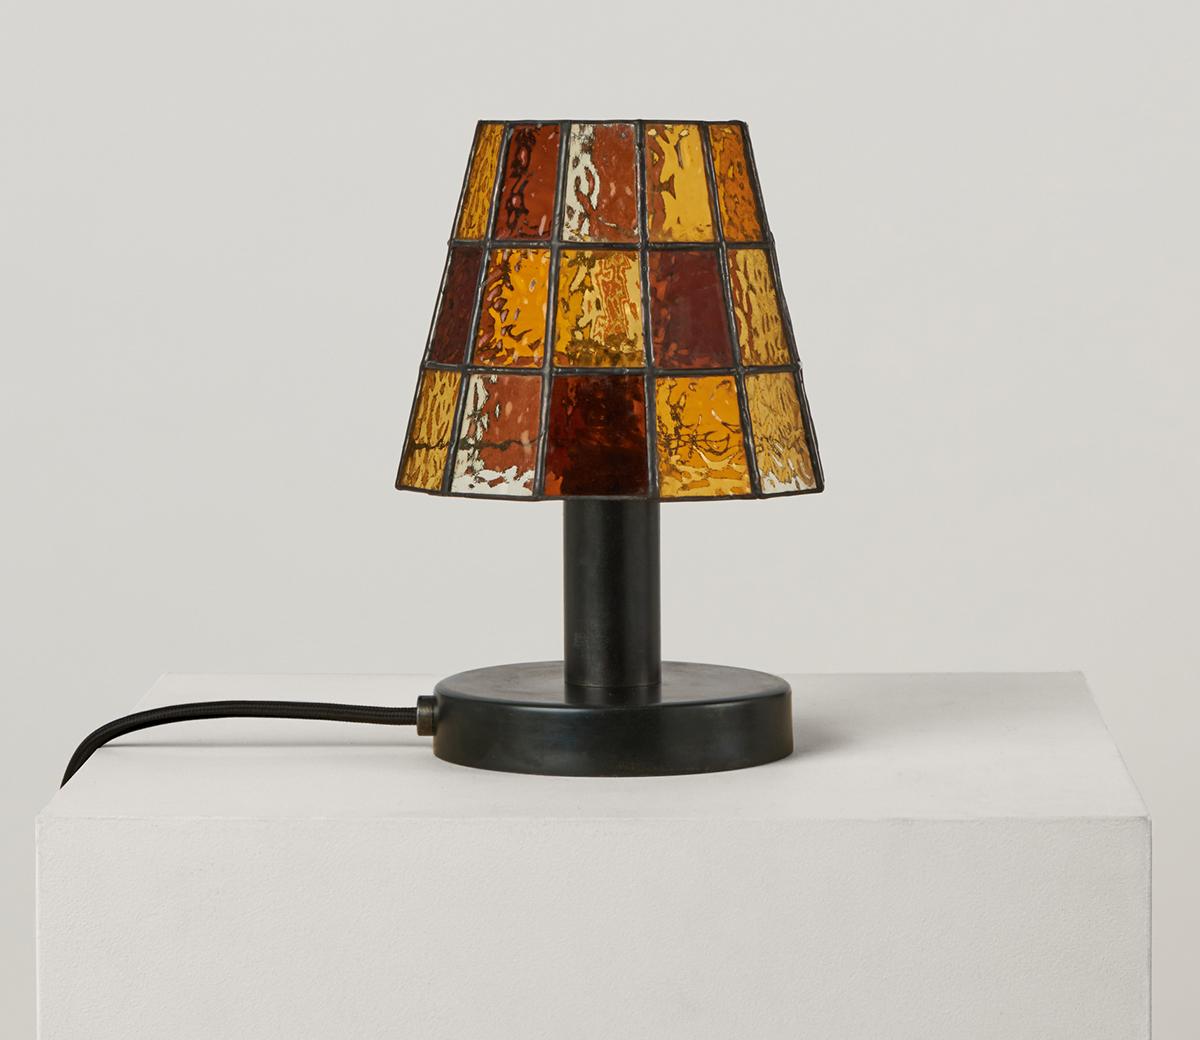 New Zealand Fun Guy Stained Glass Table Lamp with Blackened Aluminum Base by Frangere Studio For Sale